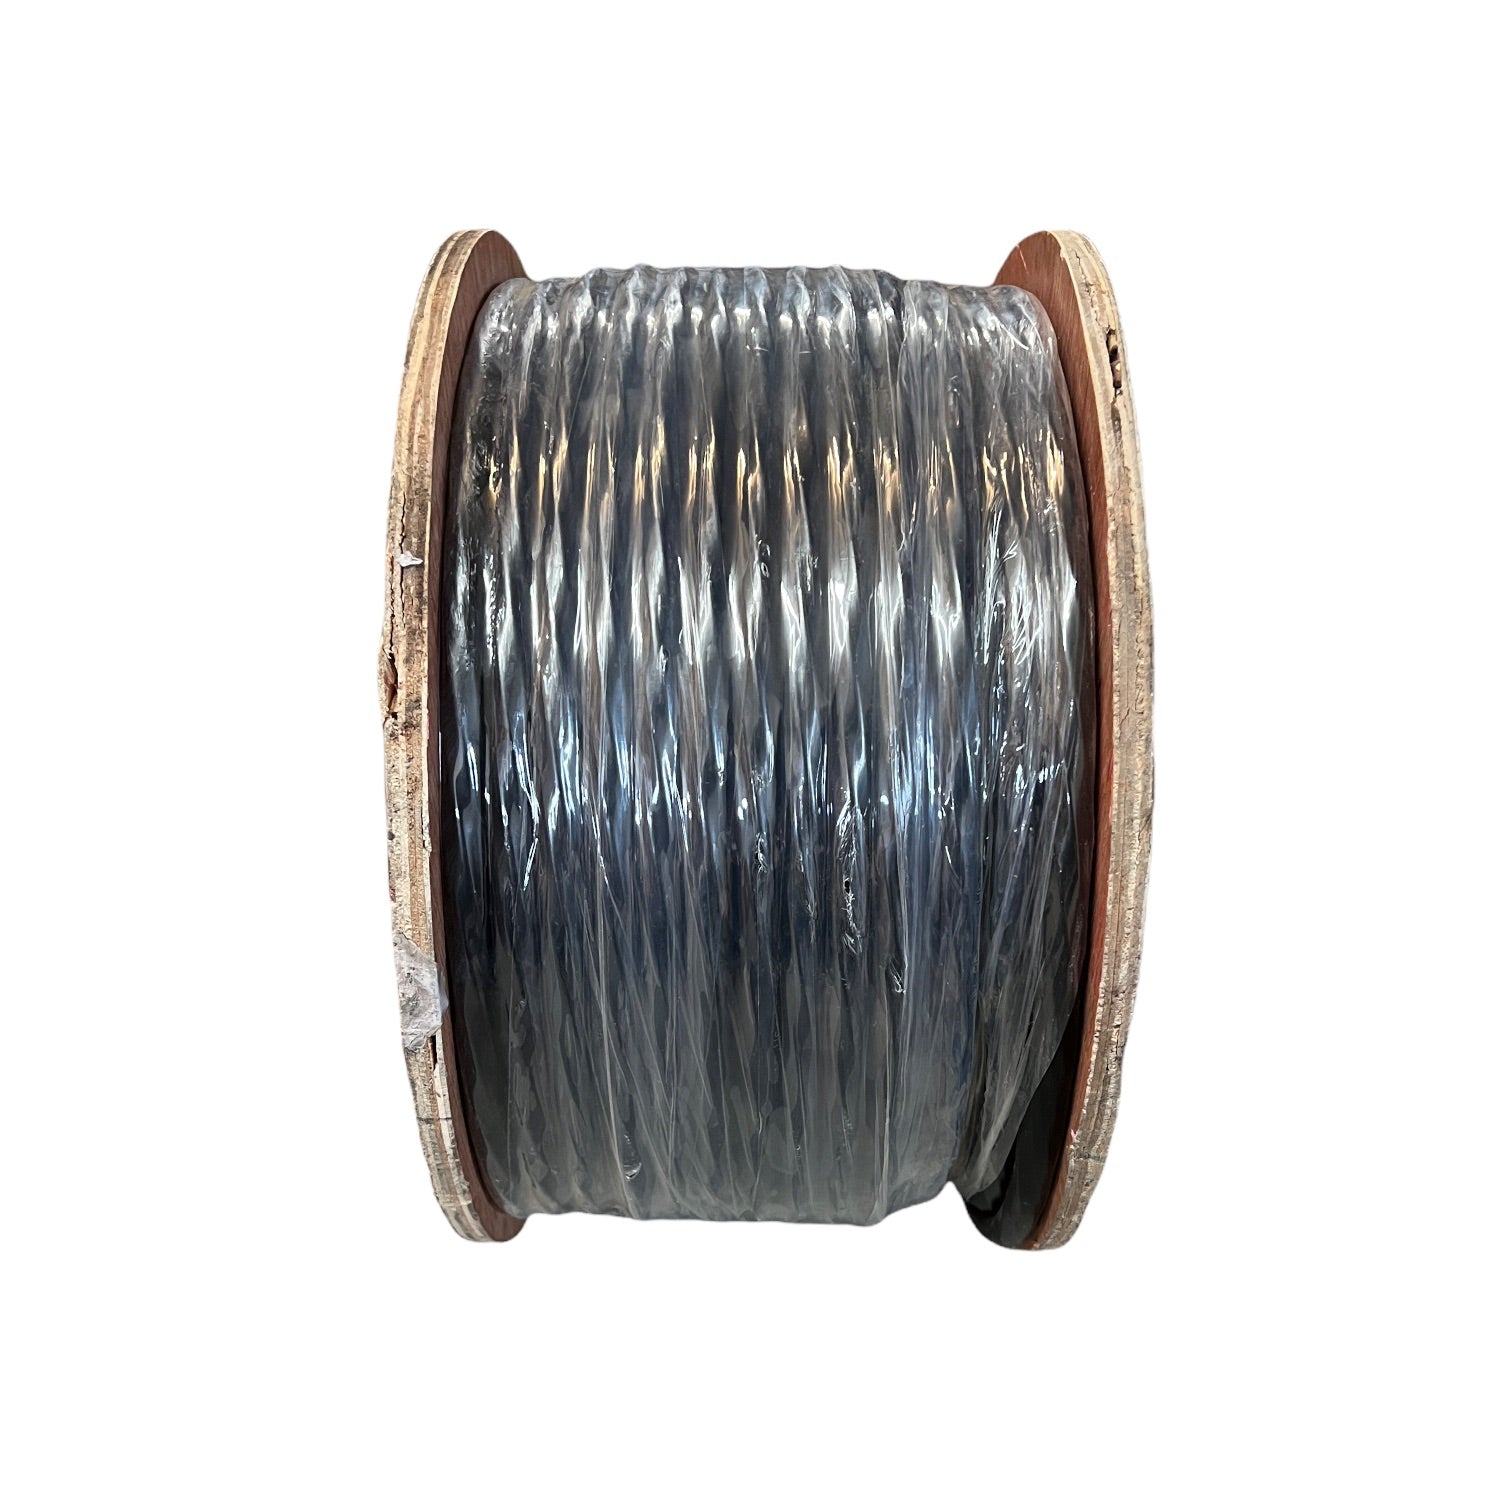 18/8X250 - Multi-Conductor Irrigation Control Wire, 18 awg, 18/8 X 250 ft